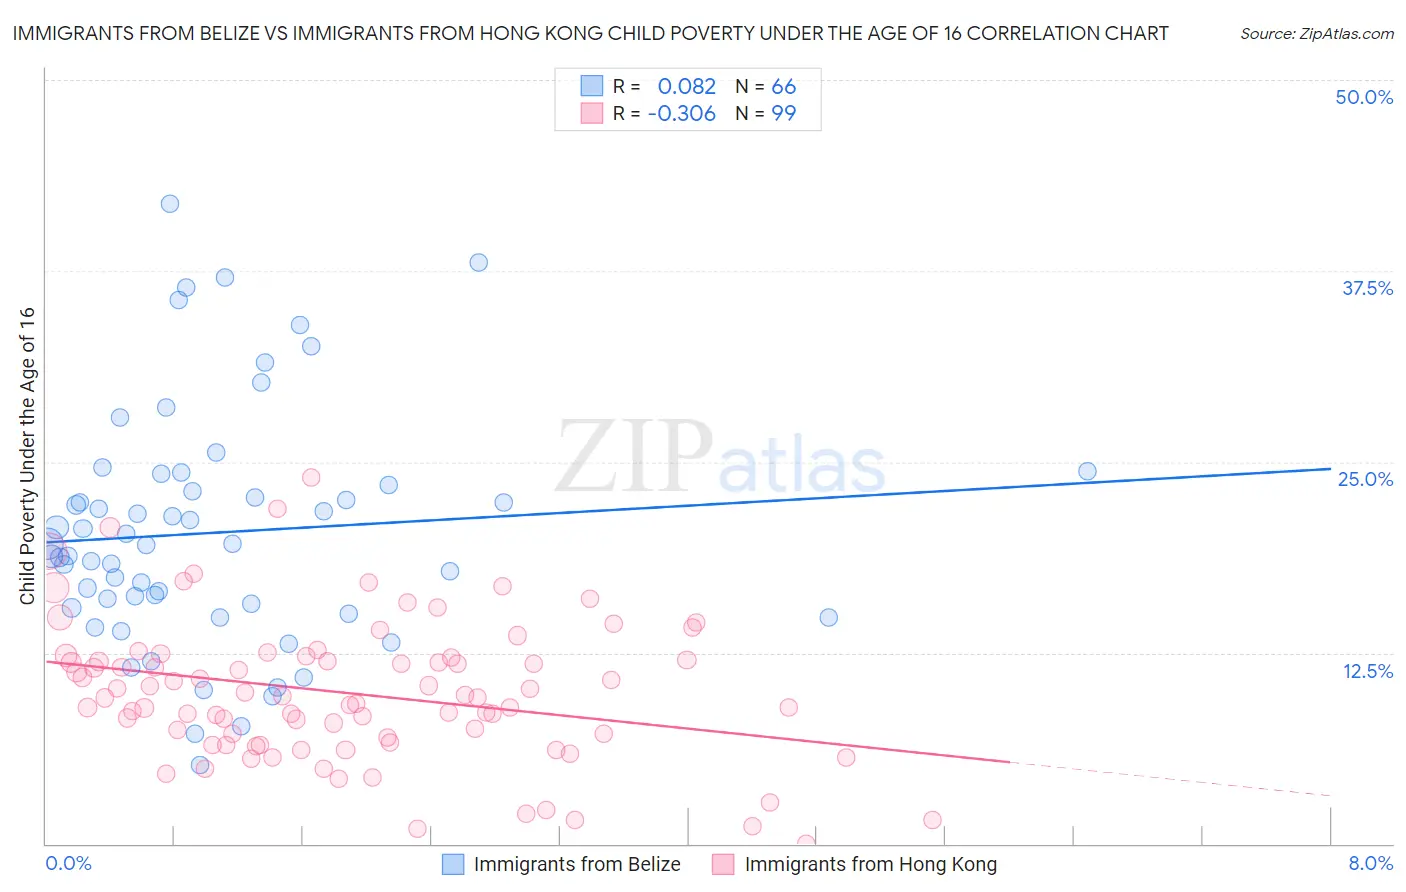 Immigrants from Belize vs Immigrants from Hong Kong Child Poverty Under the Age of 16